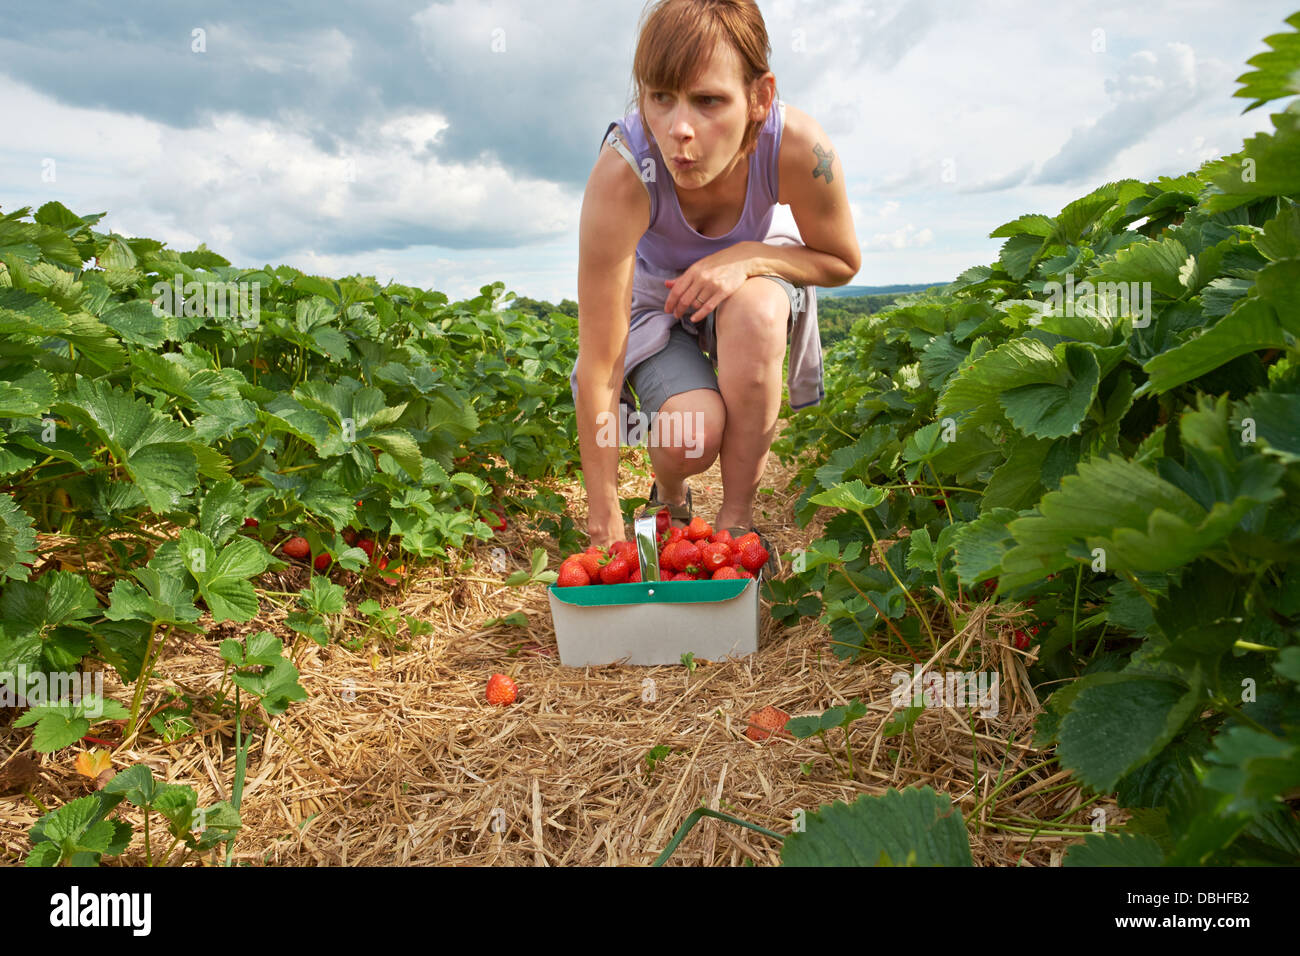 A woman picking ripe red strawberries at a fruit farm in the summer. Stock Photo